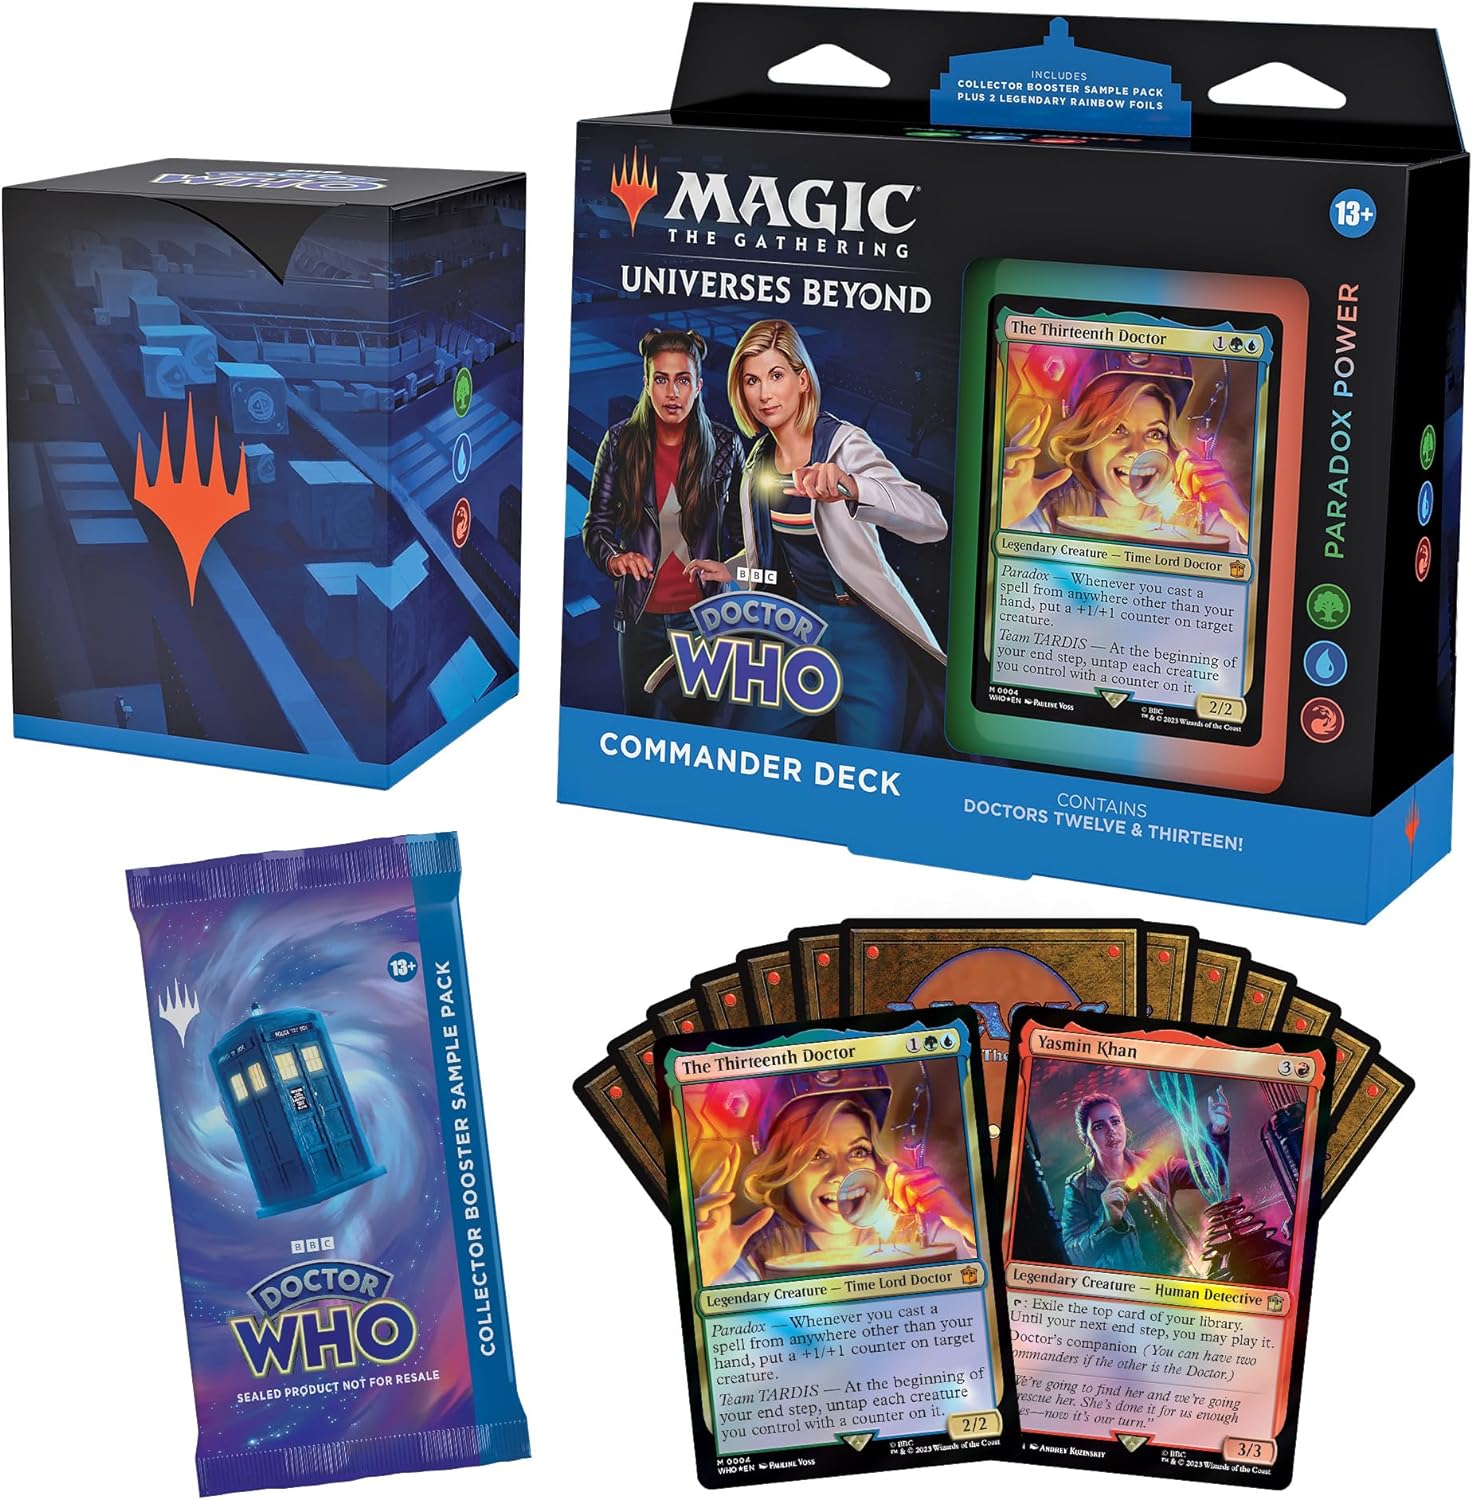 Magic The Gathering - Doctor Who Commander Deck Paradox Power MKRPRV6M87 |0|